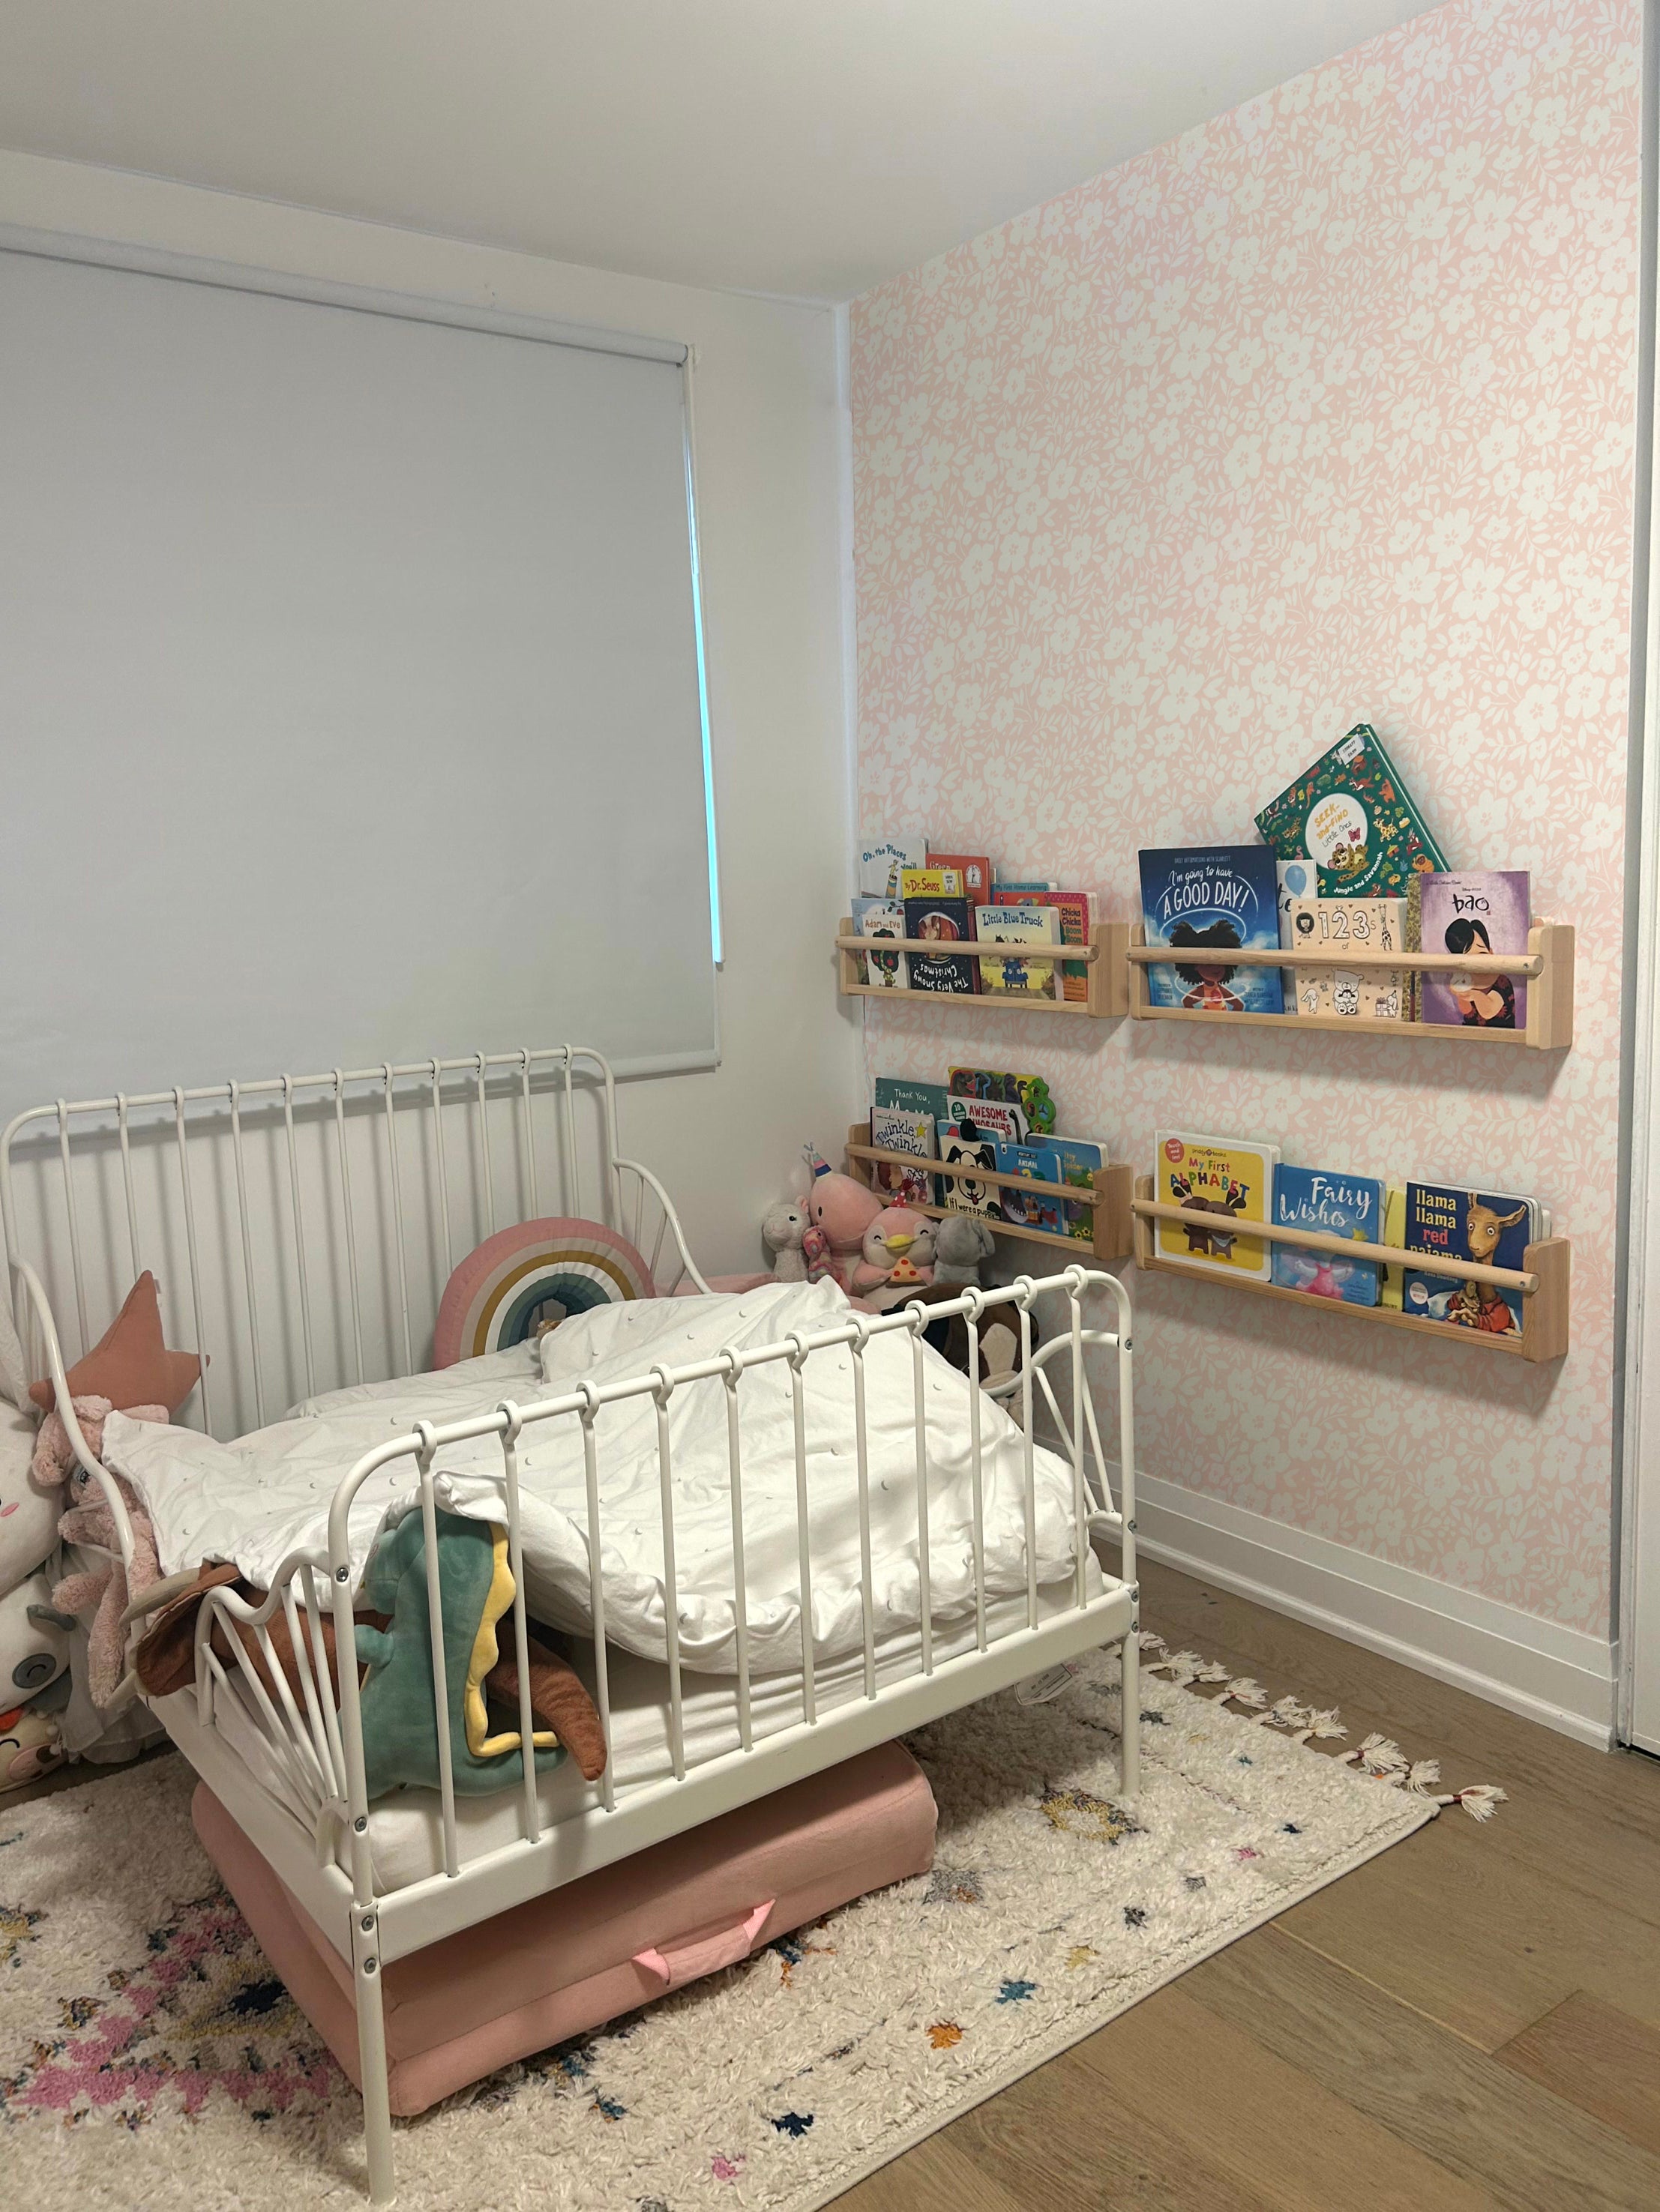 A child's bedroom featuring the Flower Power Wallpaper in a delicate pink floral pattern. The room includes a white metal bed with colorful bedding, surrounded by toys and children's books, creating a playful and inviting atmosphere.